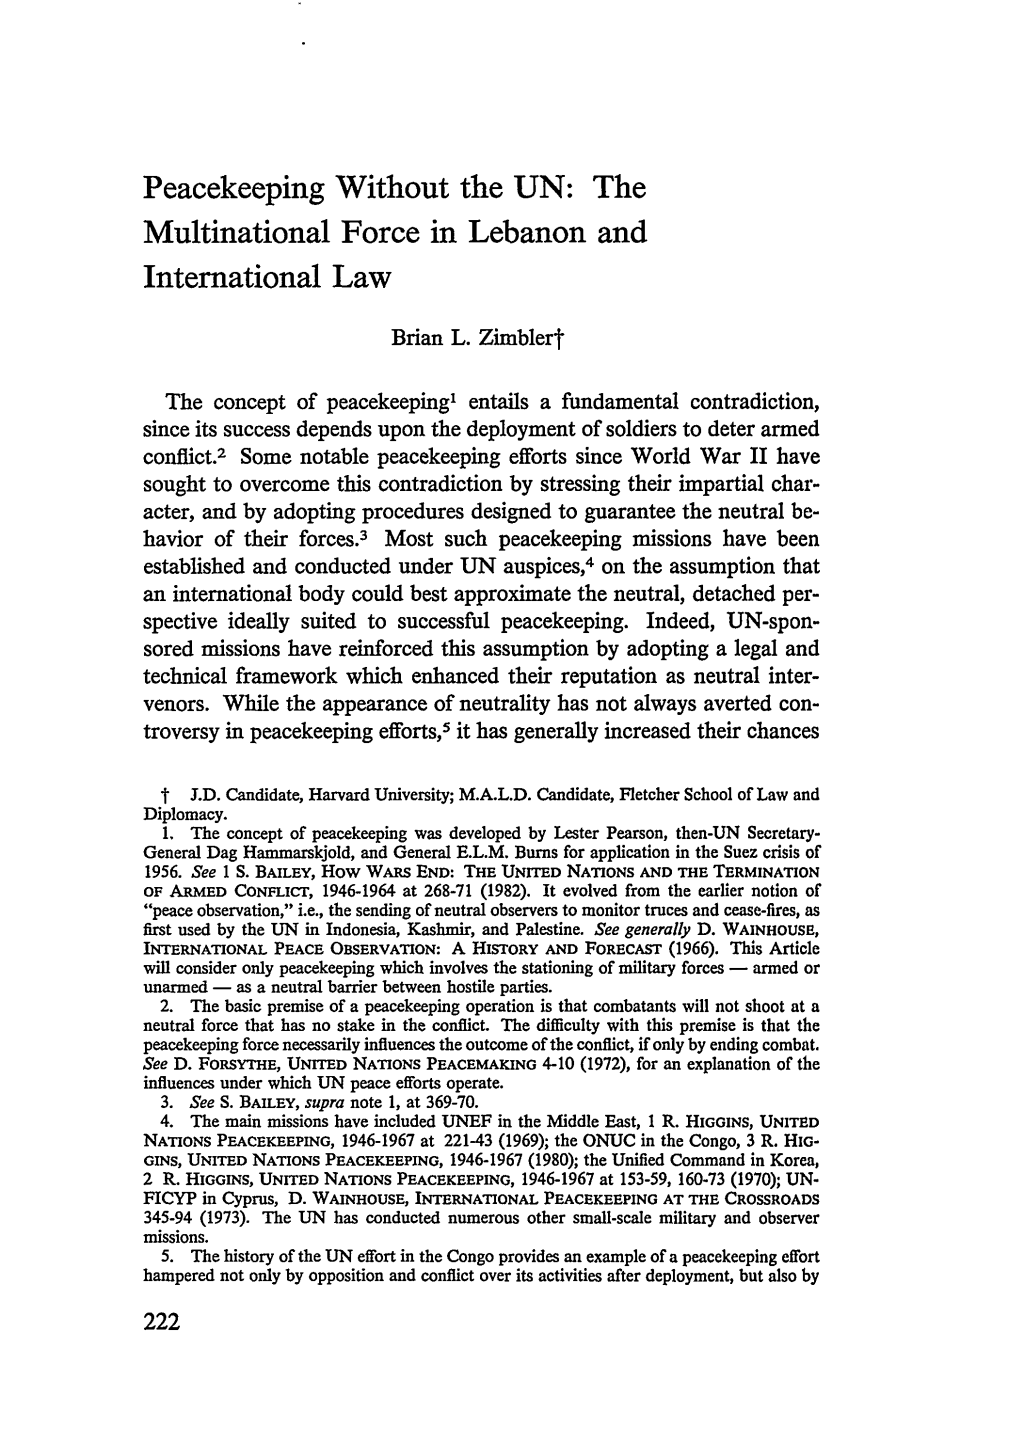 Peacekeeping Without the UN: the Multinational Force in Lebanon and International Law